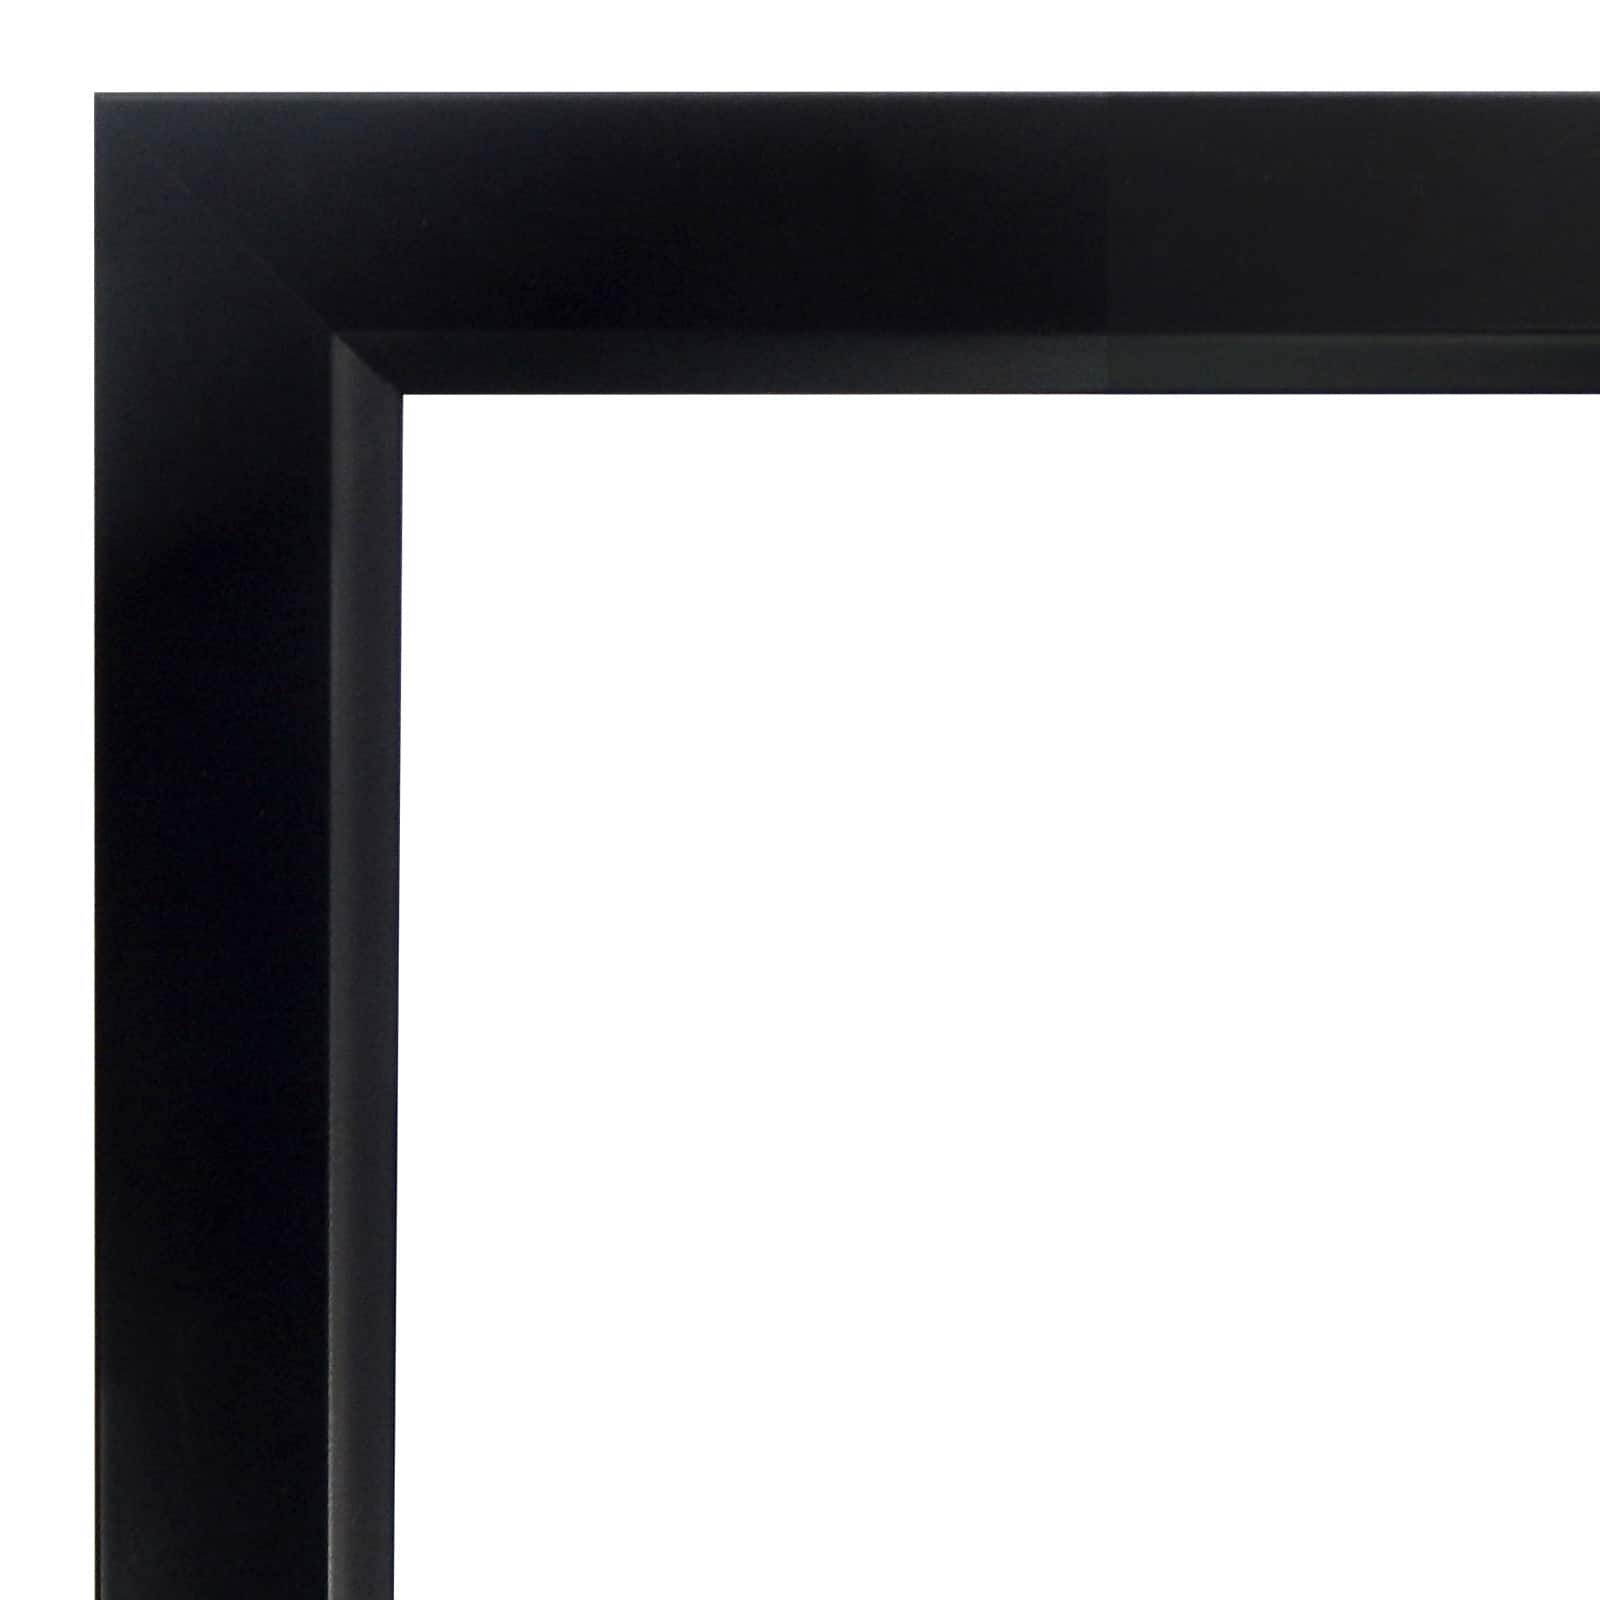 Details about   33x30 Picture Frames White Wood 33x30 Frame 33 x 30 poster frame  Acrylic Glass 